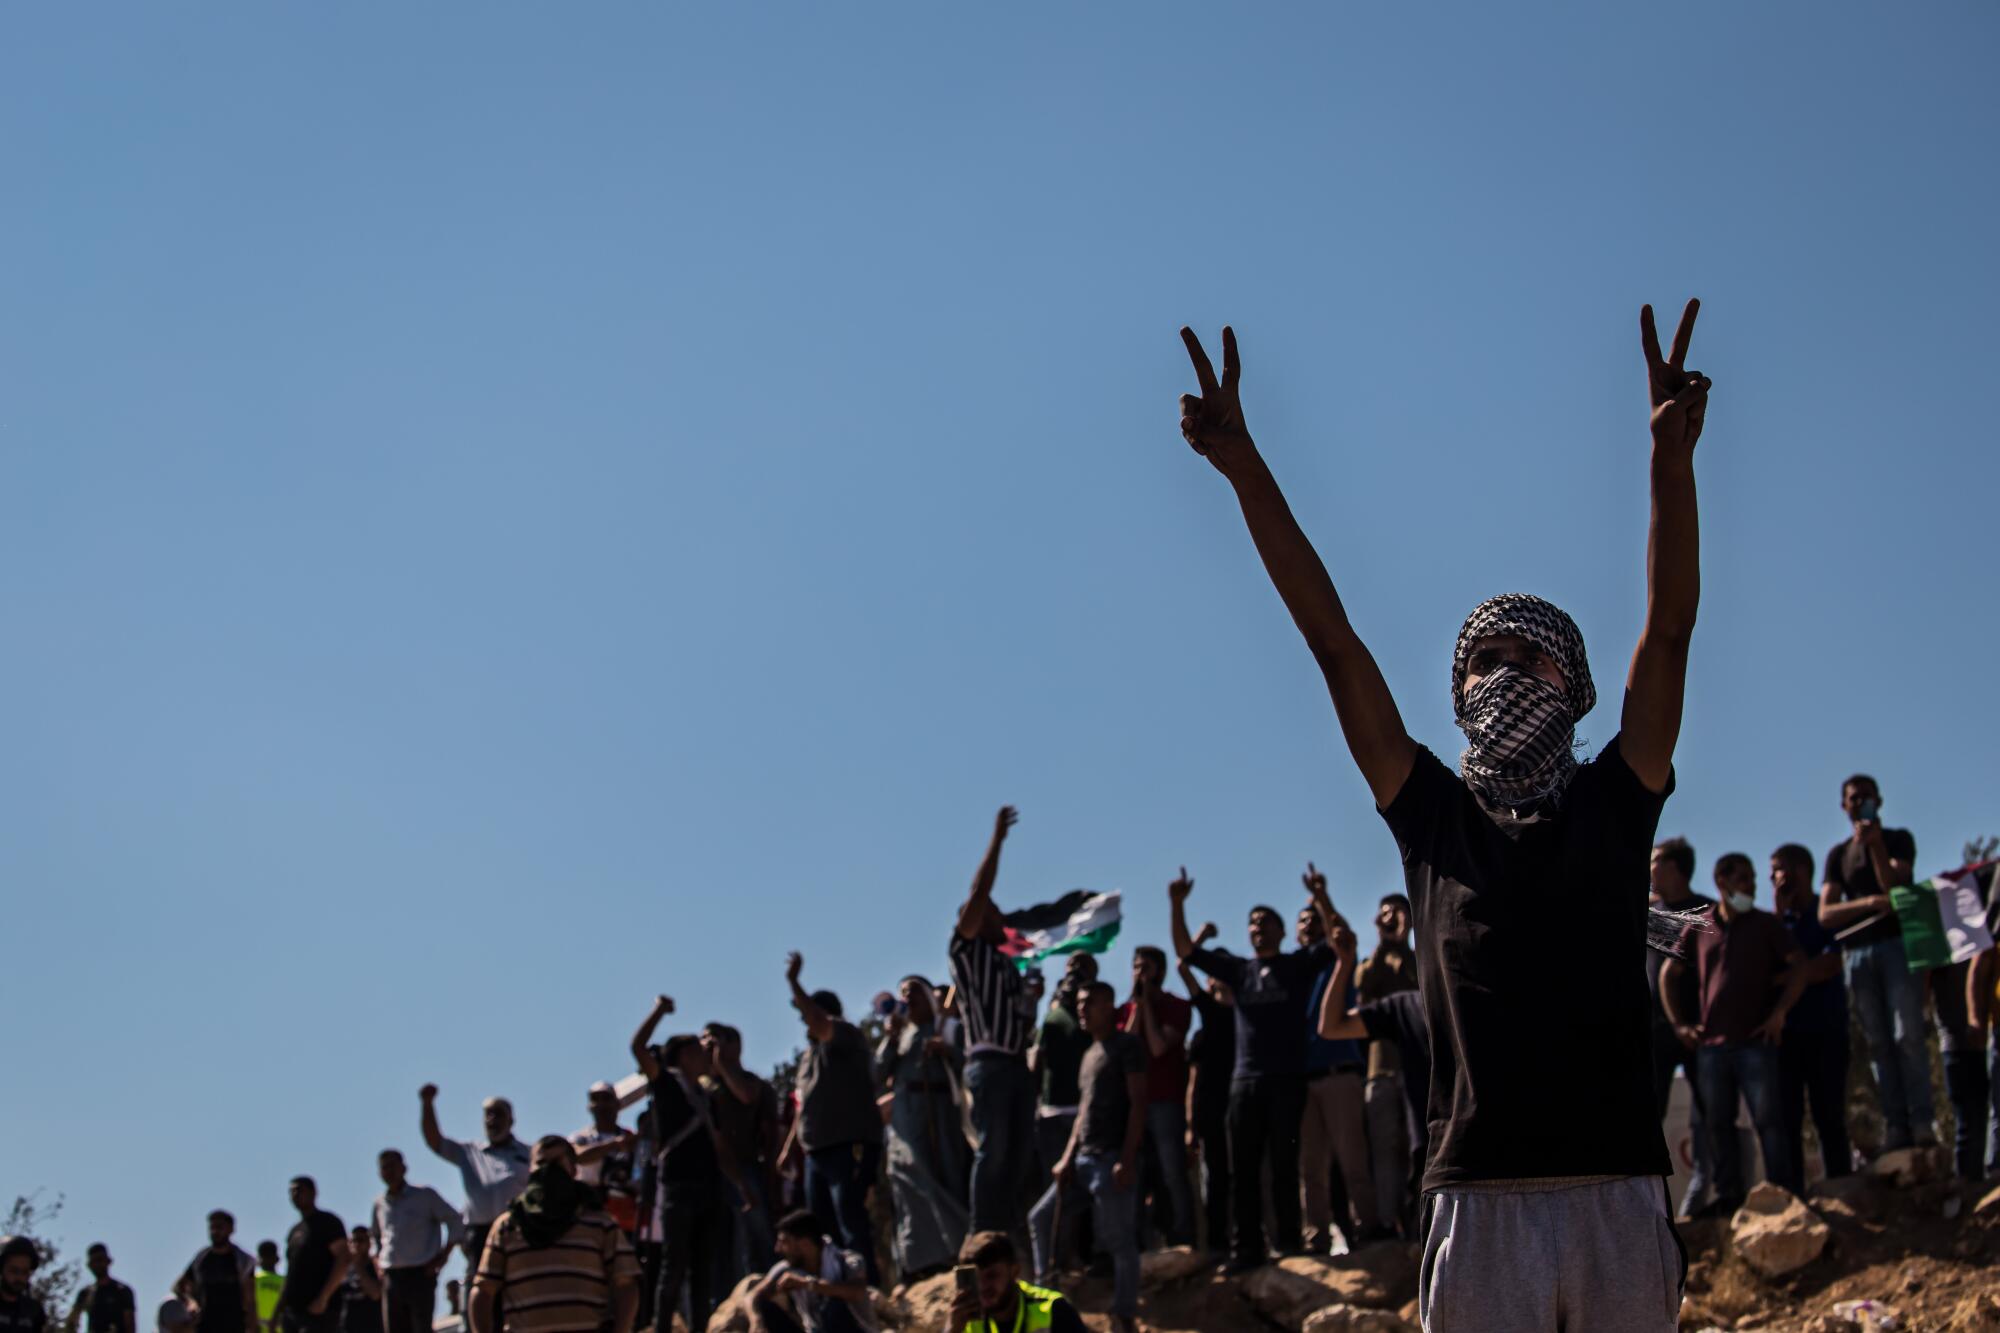 A Palestinian raises his arms in front of a line of protesters chanting slogans at Israeli soldiers